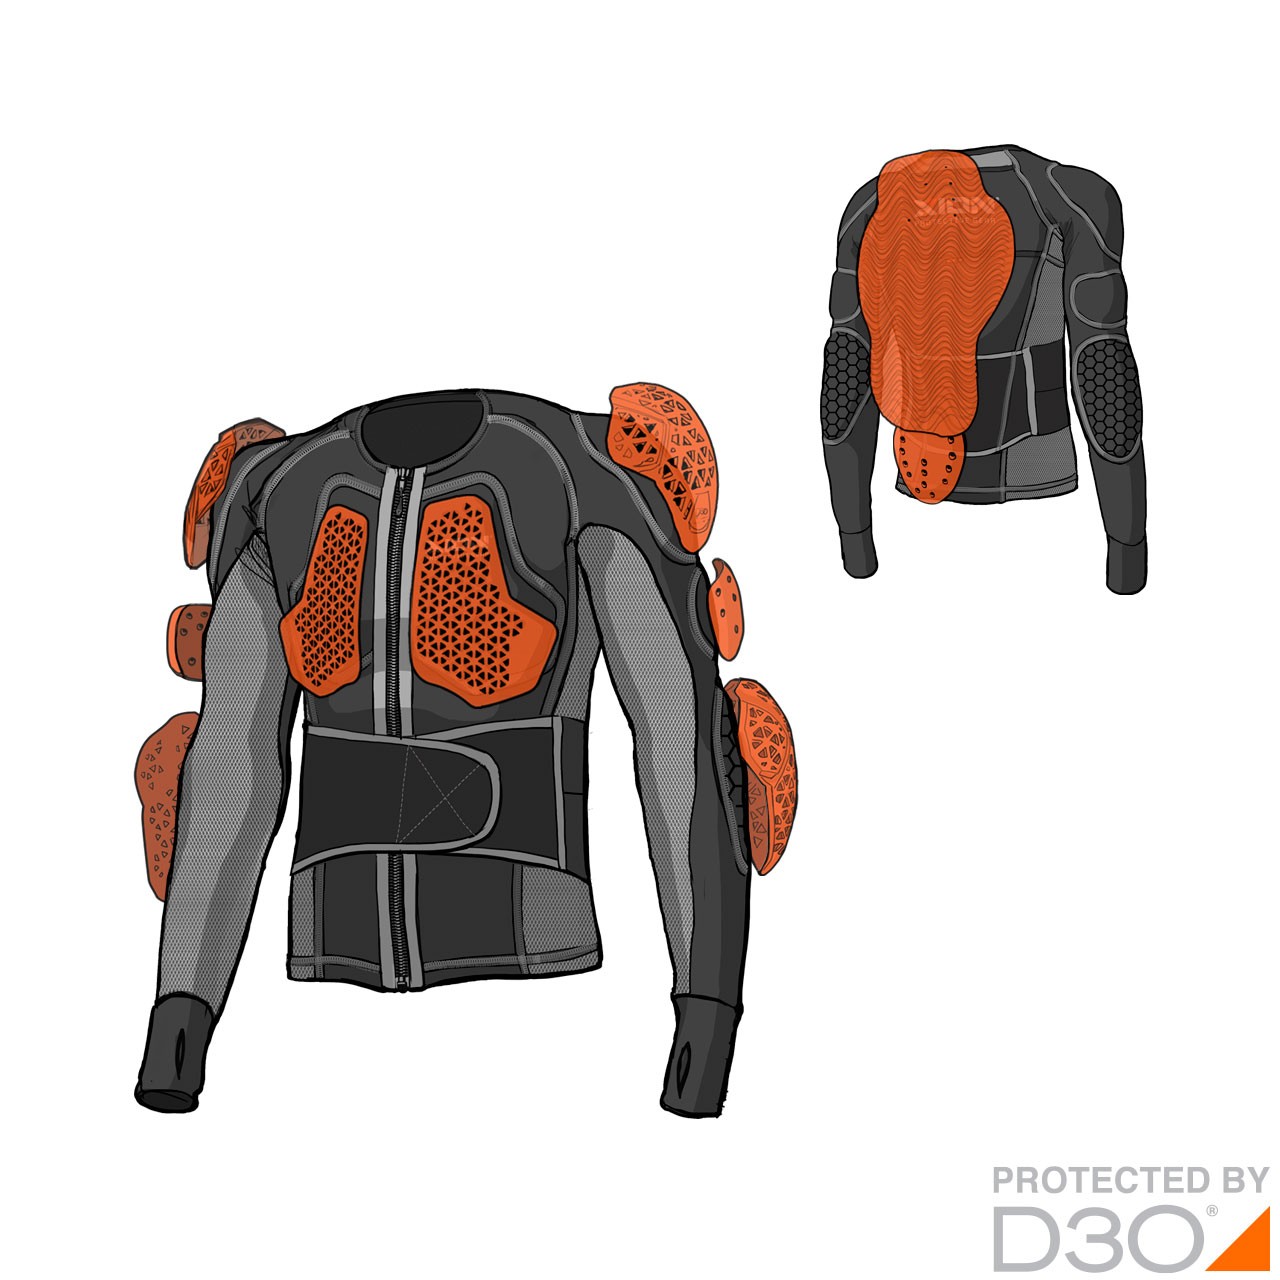 A view of the D30 protective armour found in Xion Protective Gear.  Photo courtesy of Xion Protective Gear